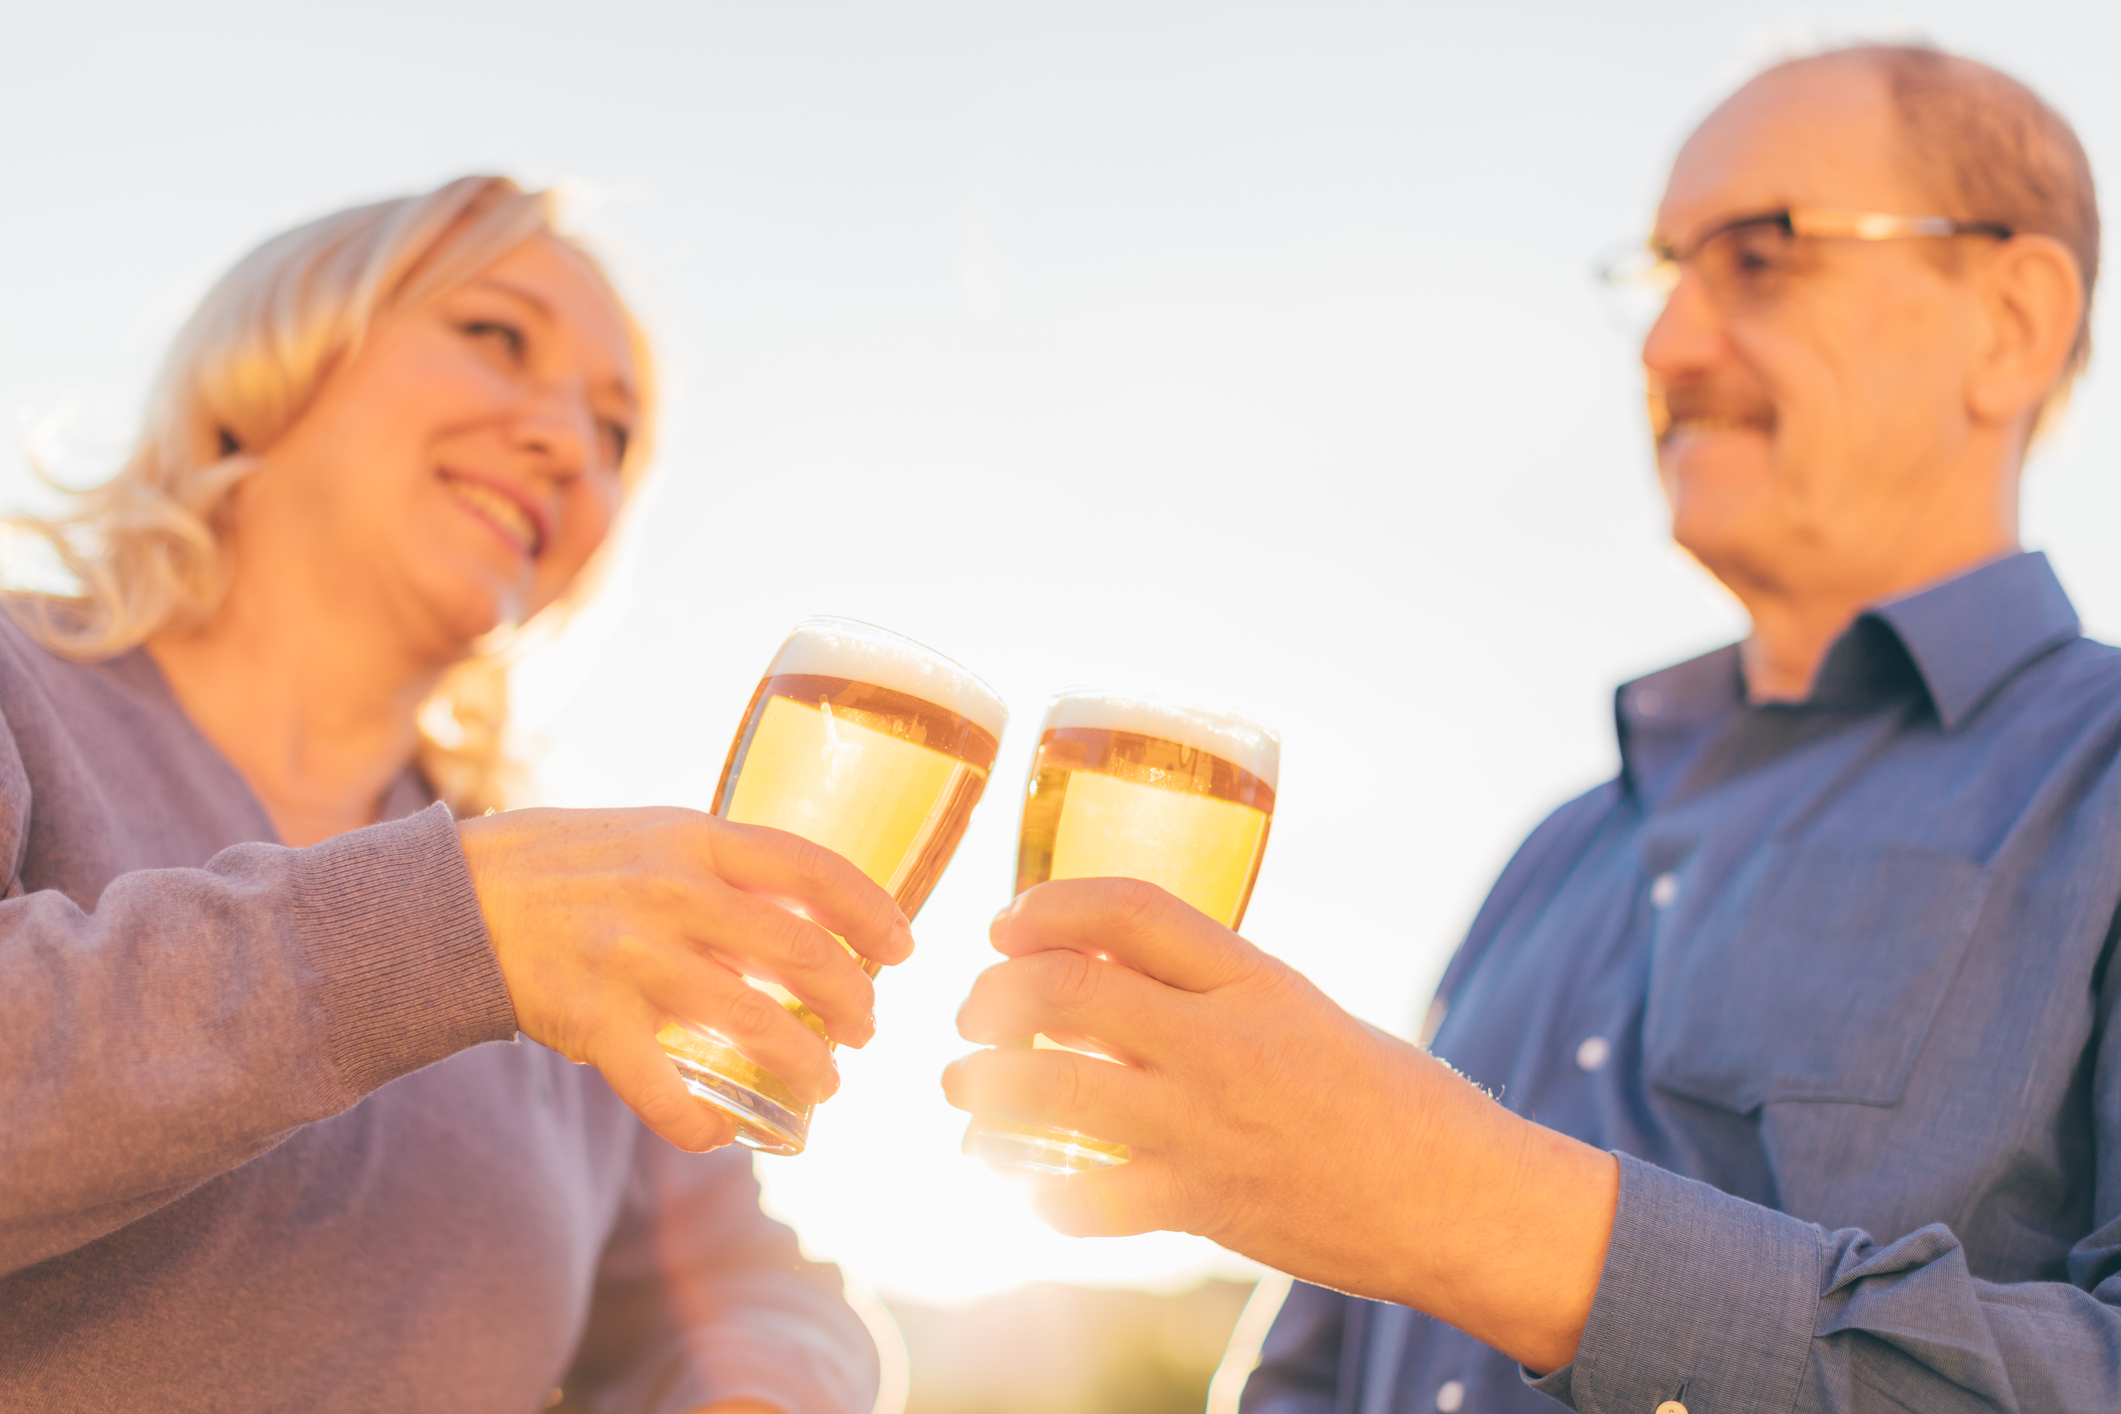 Senior couple drinking beer together, focus on hands with glasses.